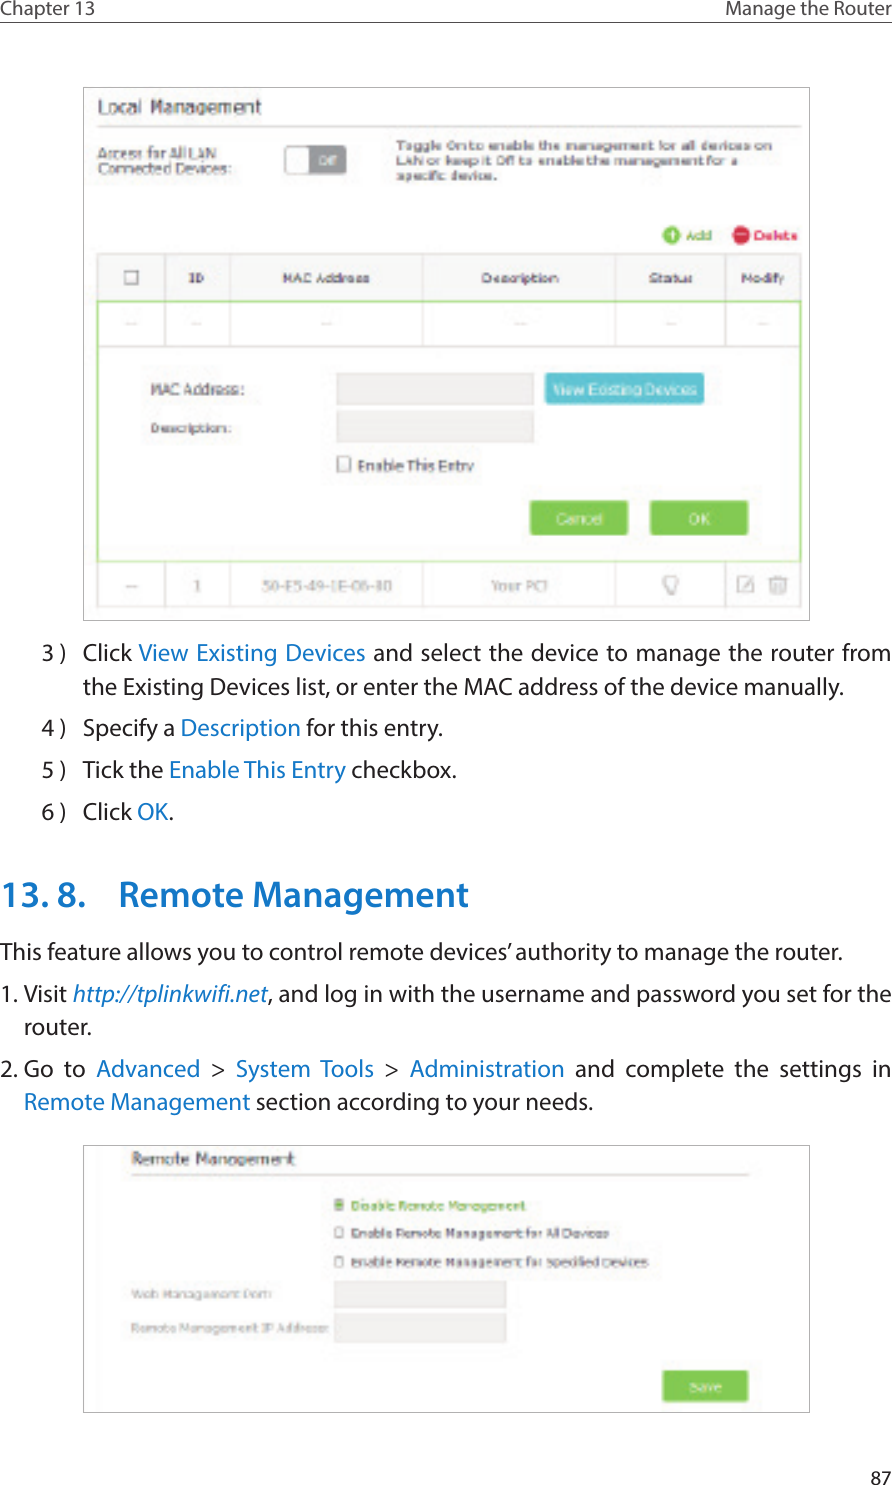 87Chapter 13 Manage the Router 3 )  Click View Existing Devices and select the device to manage the router from the Existing Devices list, or enter the MAC address of the device manually.4 )  Specify a Description for this entry.5 )  Tick the Enable This Entry checkbox.6 )  Click OK.13. 8.  Remote ManagementThis feature allows you to control remote devices’ authority to manage the router.1. Visit http://tplinkwifi.net, and log in with the username and password you set for the router.2. Go to Advanced &gt; System Tools &gt;  Administration and complete the settings in Remote Management section according to your needs.